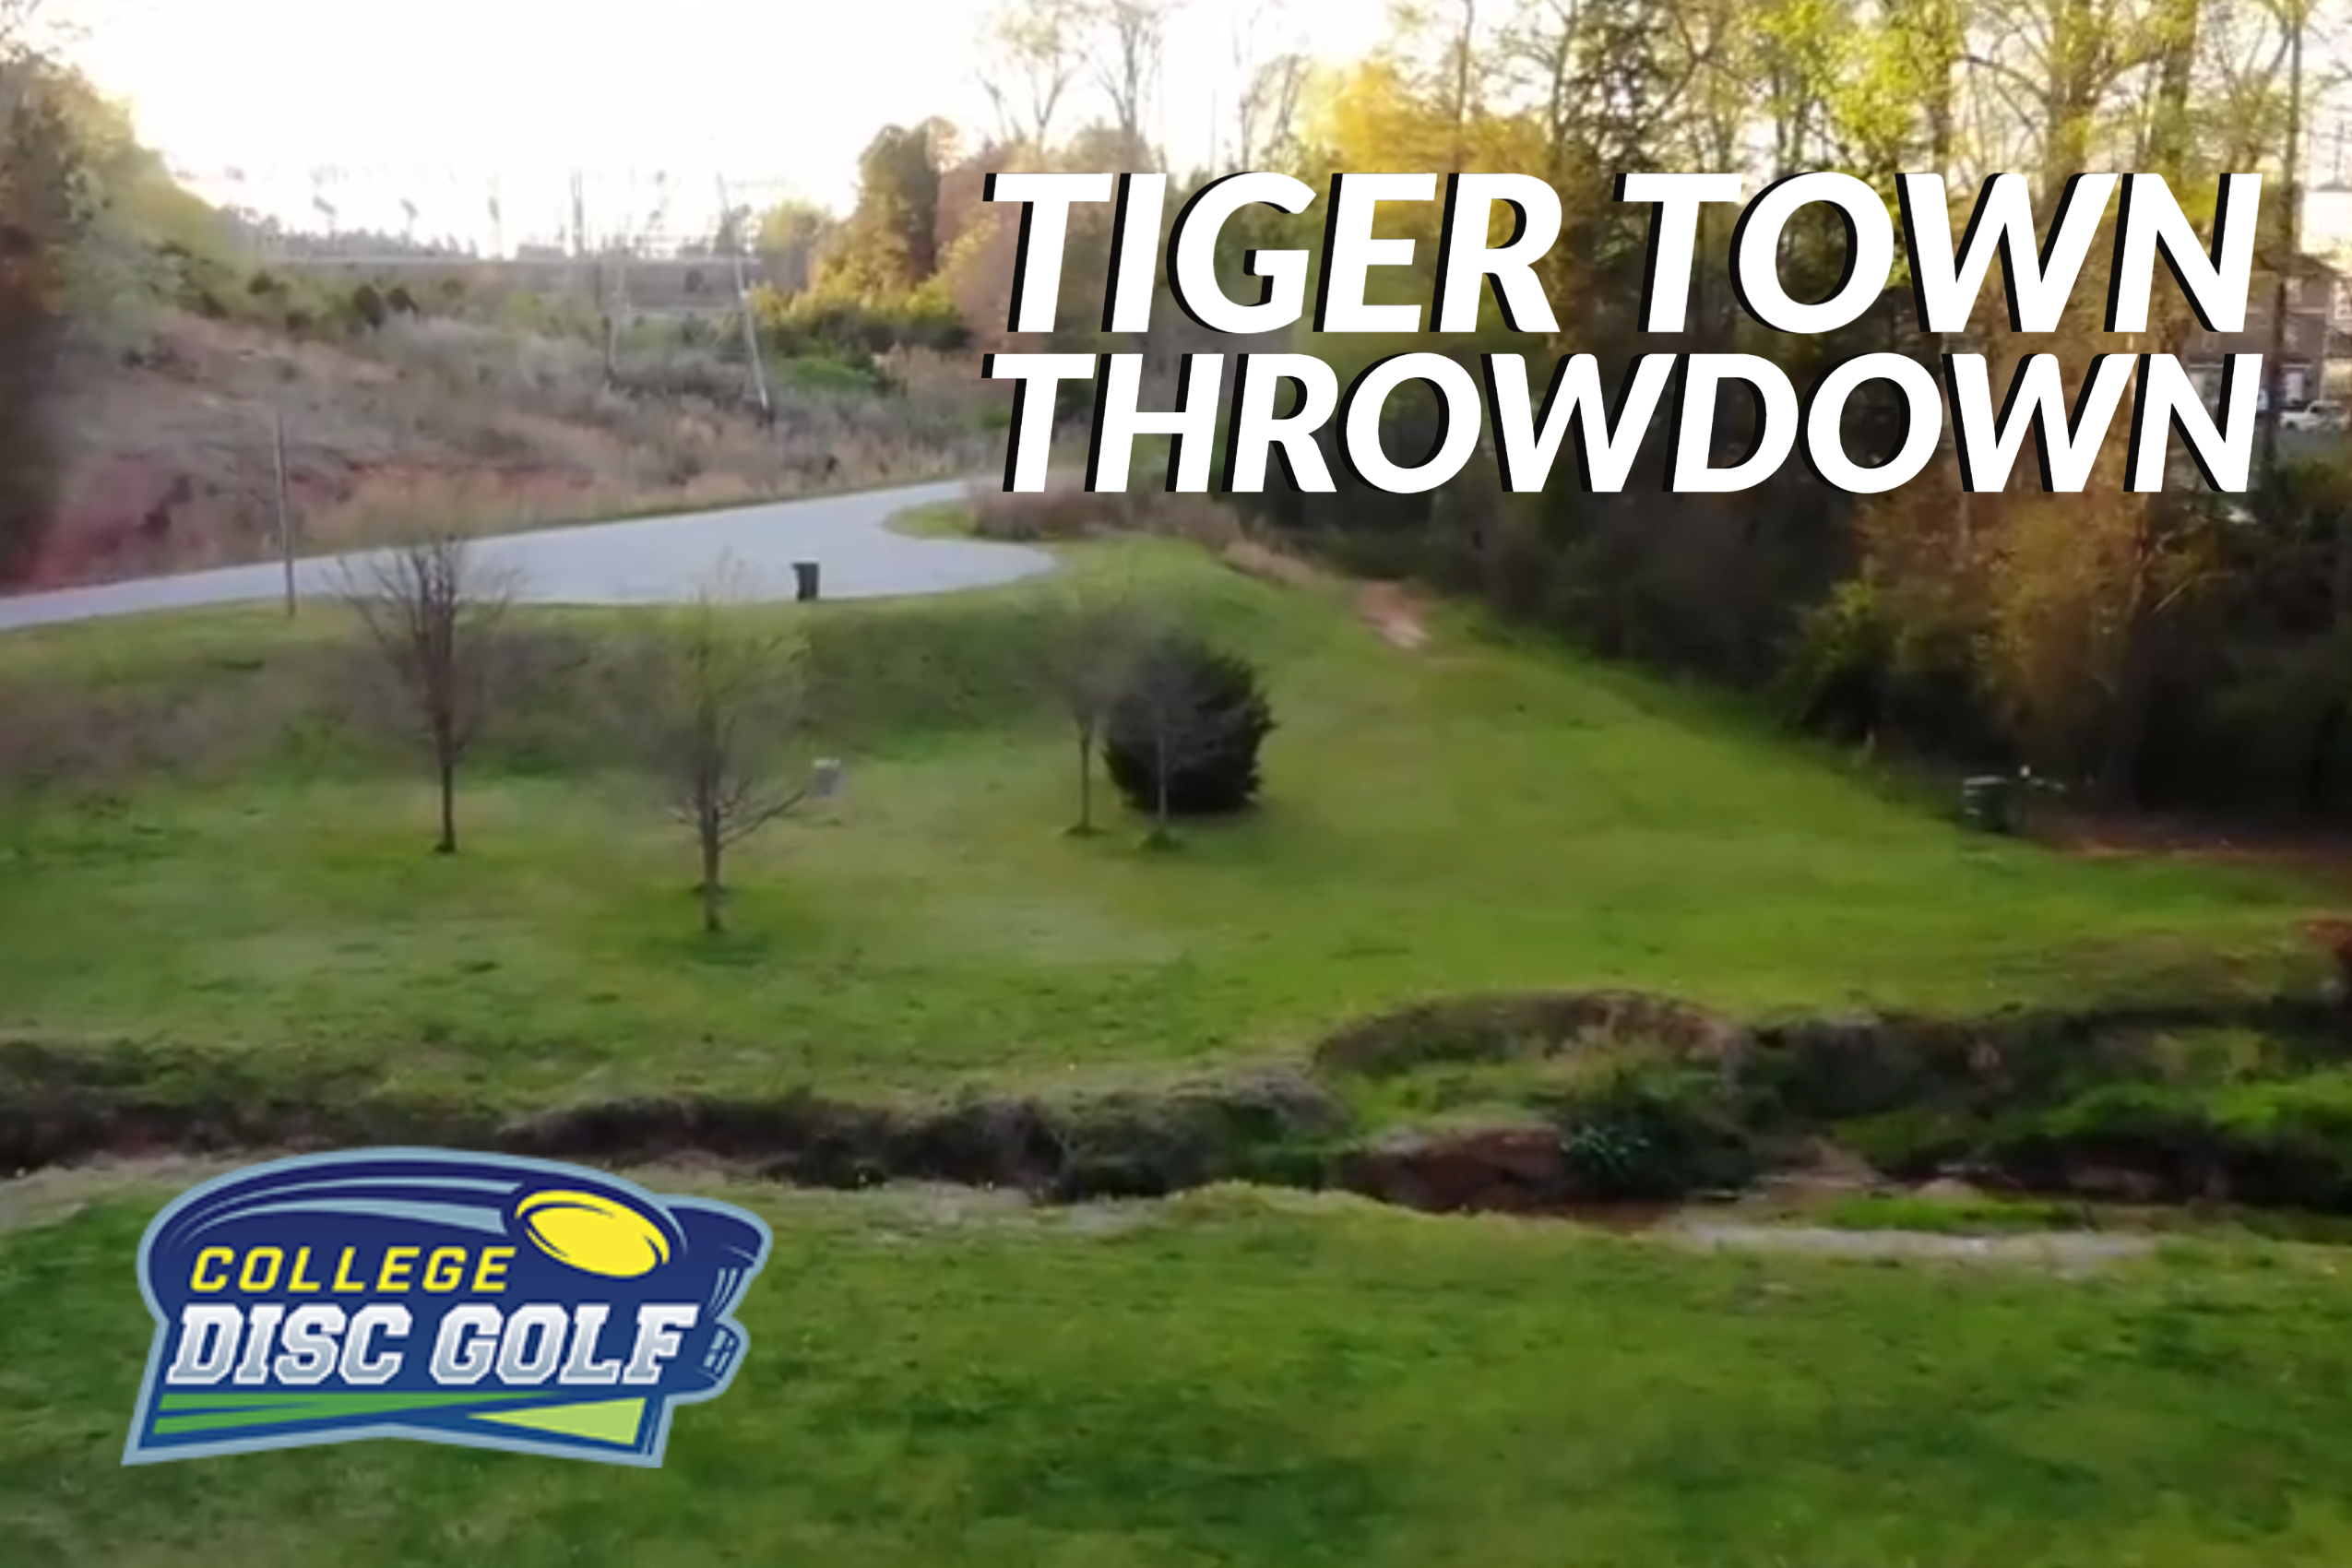 30 Teams Fight For College Championship Spots At Tiger Town Throwdown